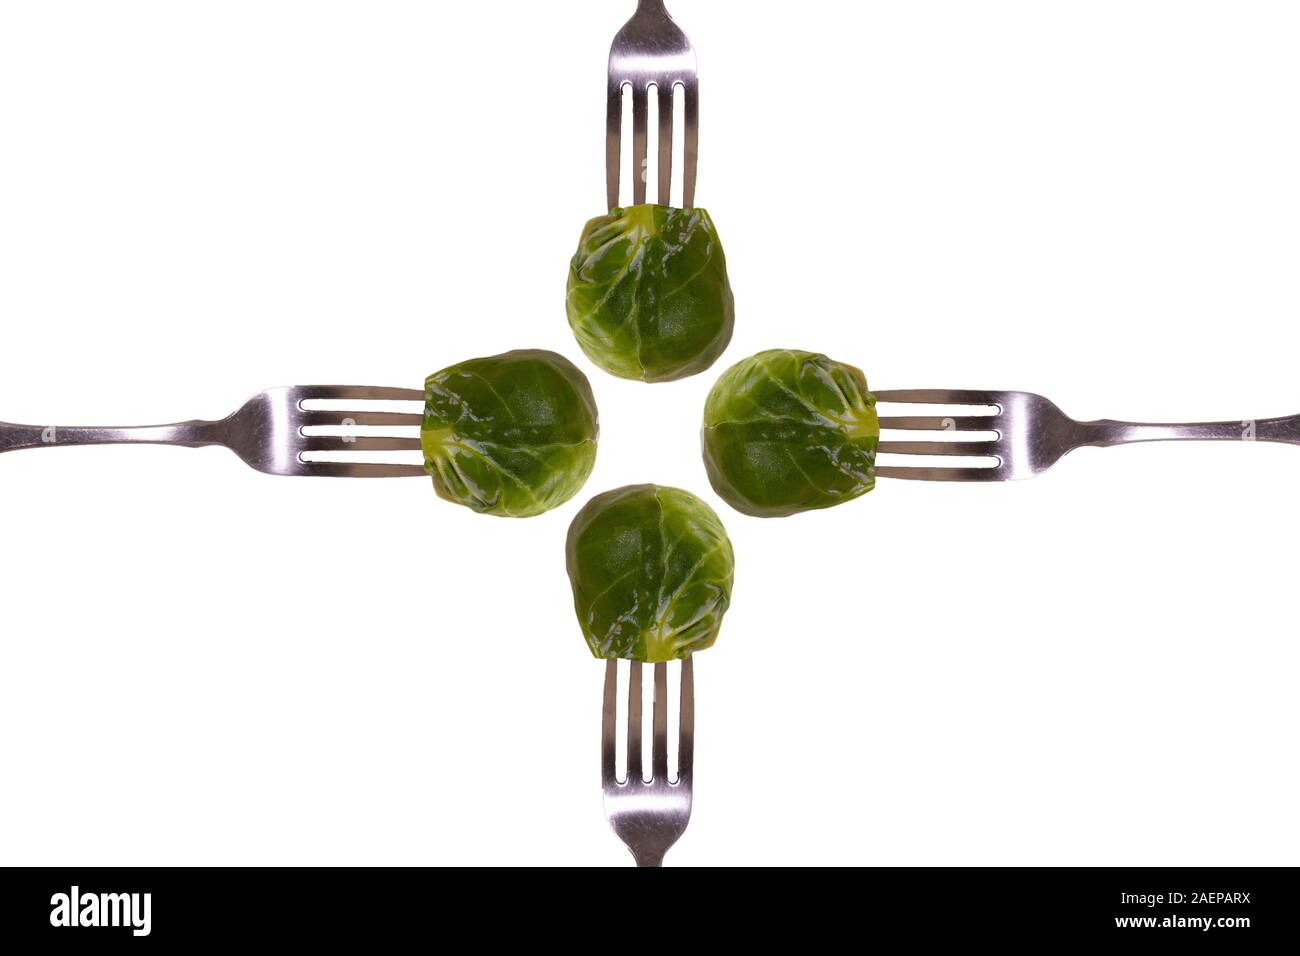 Food on forks.  Eat up and get all your nutrients! Stock Photo